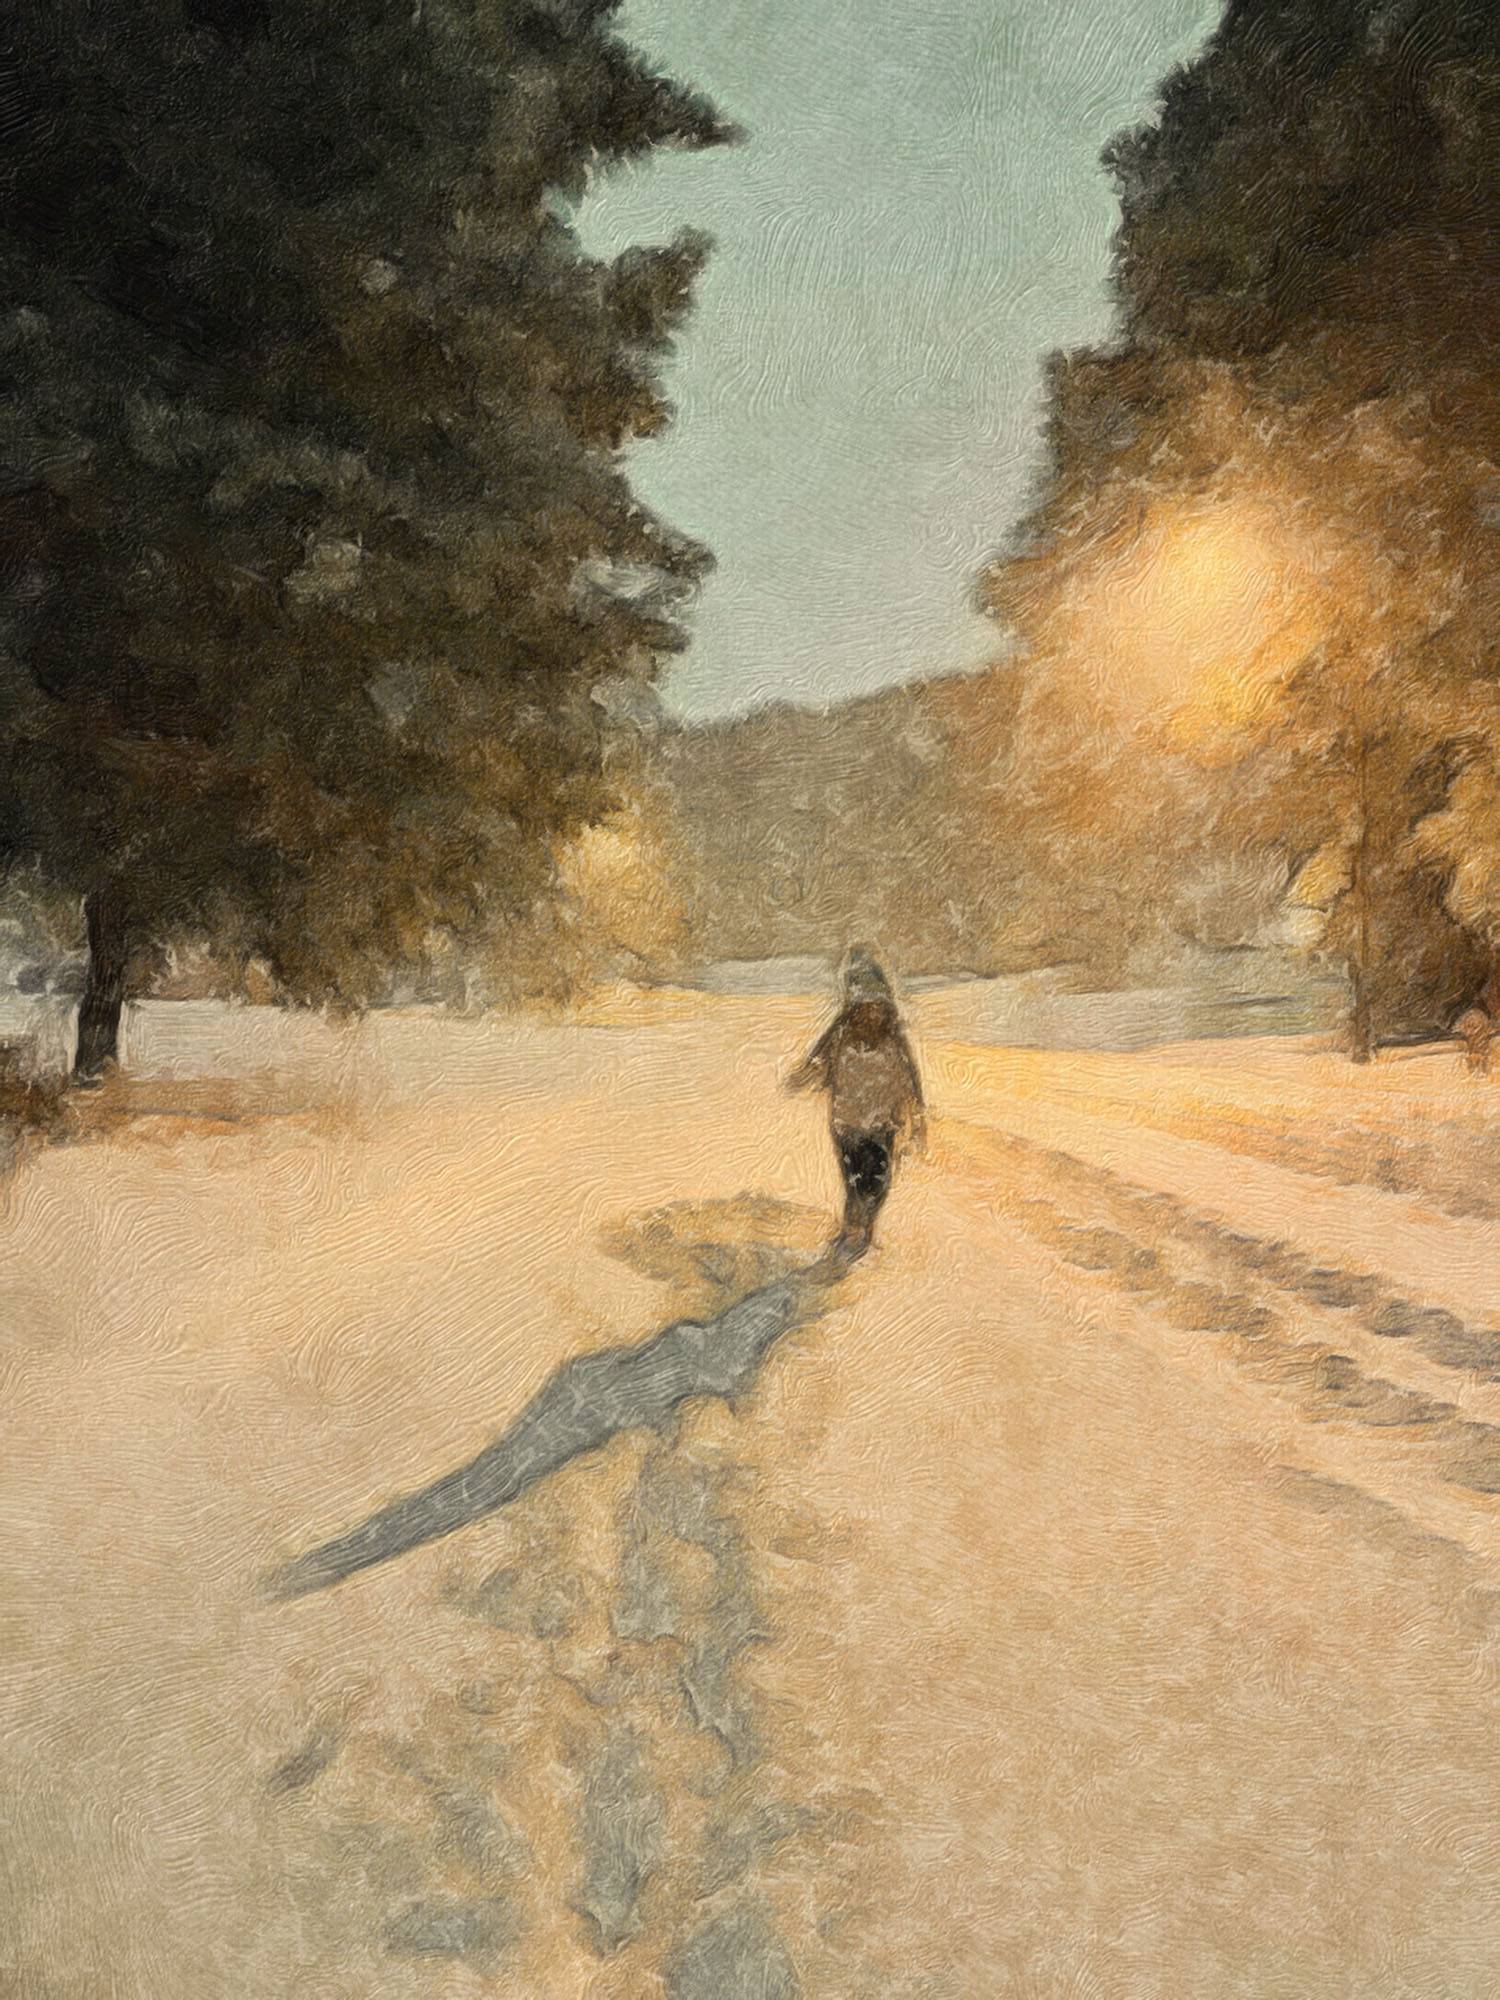 Photo of little girl walking in the snow. Photo has filter making the photo look like a painting.